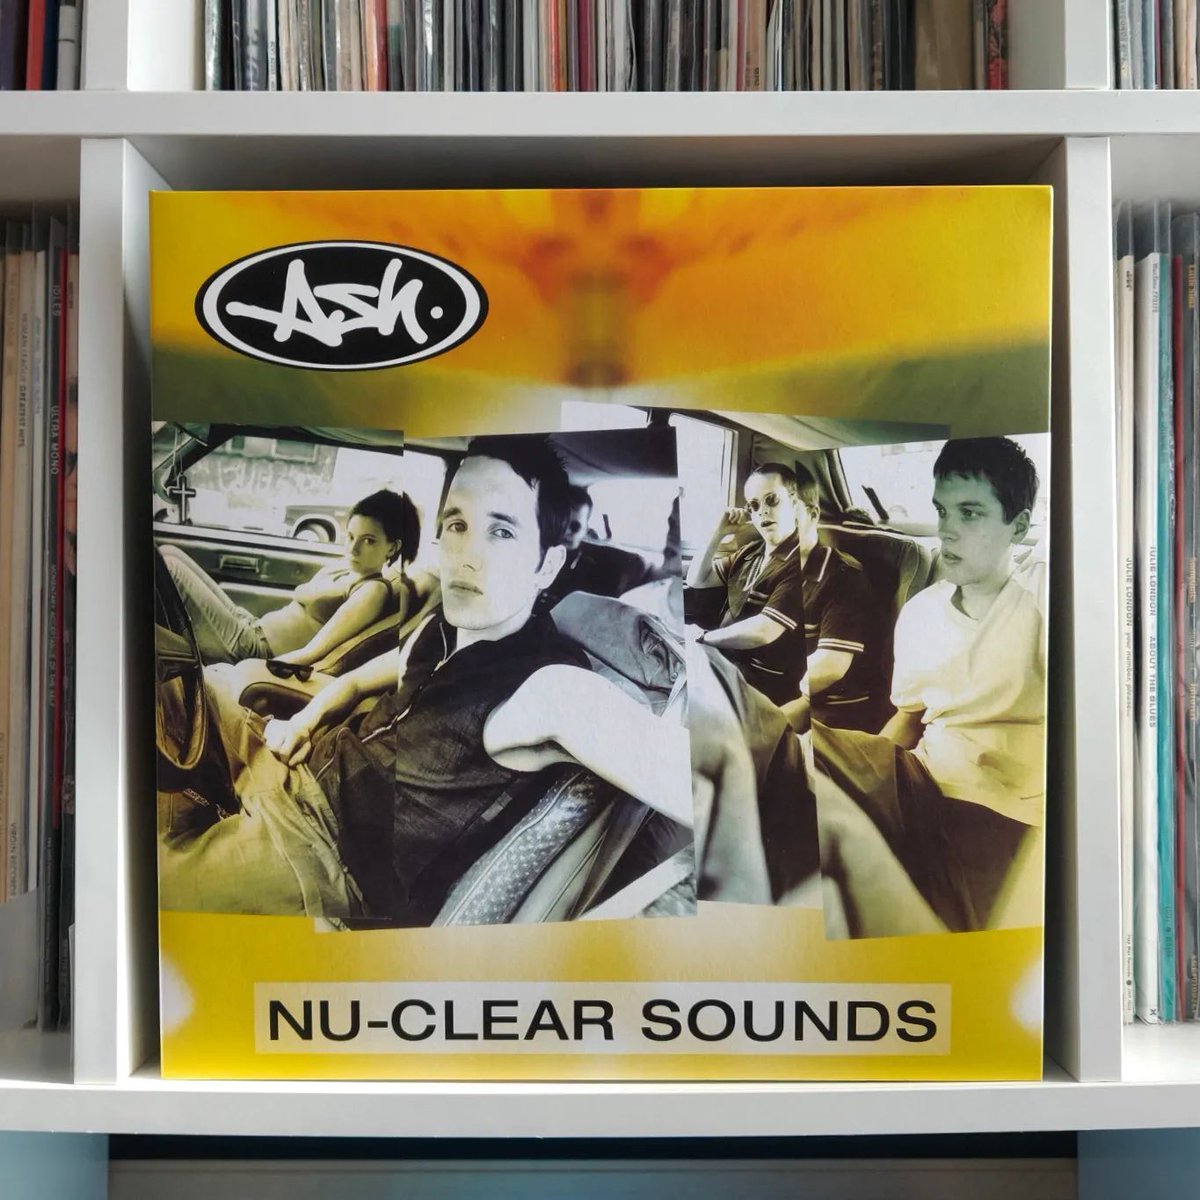 Dive back into '98 with Ash's 'Nu-Clear Sounds' blasting through my speakers. A timeless trip of raw riffs and rebel heart. 🎸💥 

📸 ig: vinyl_burger 

#lovevinyl #vinylmusic #vinylcollectors #vinyllife #recordlover #igvinyl #recordscollection #vinylrecords #instarecords